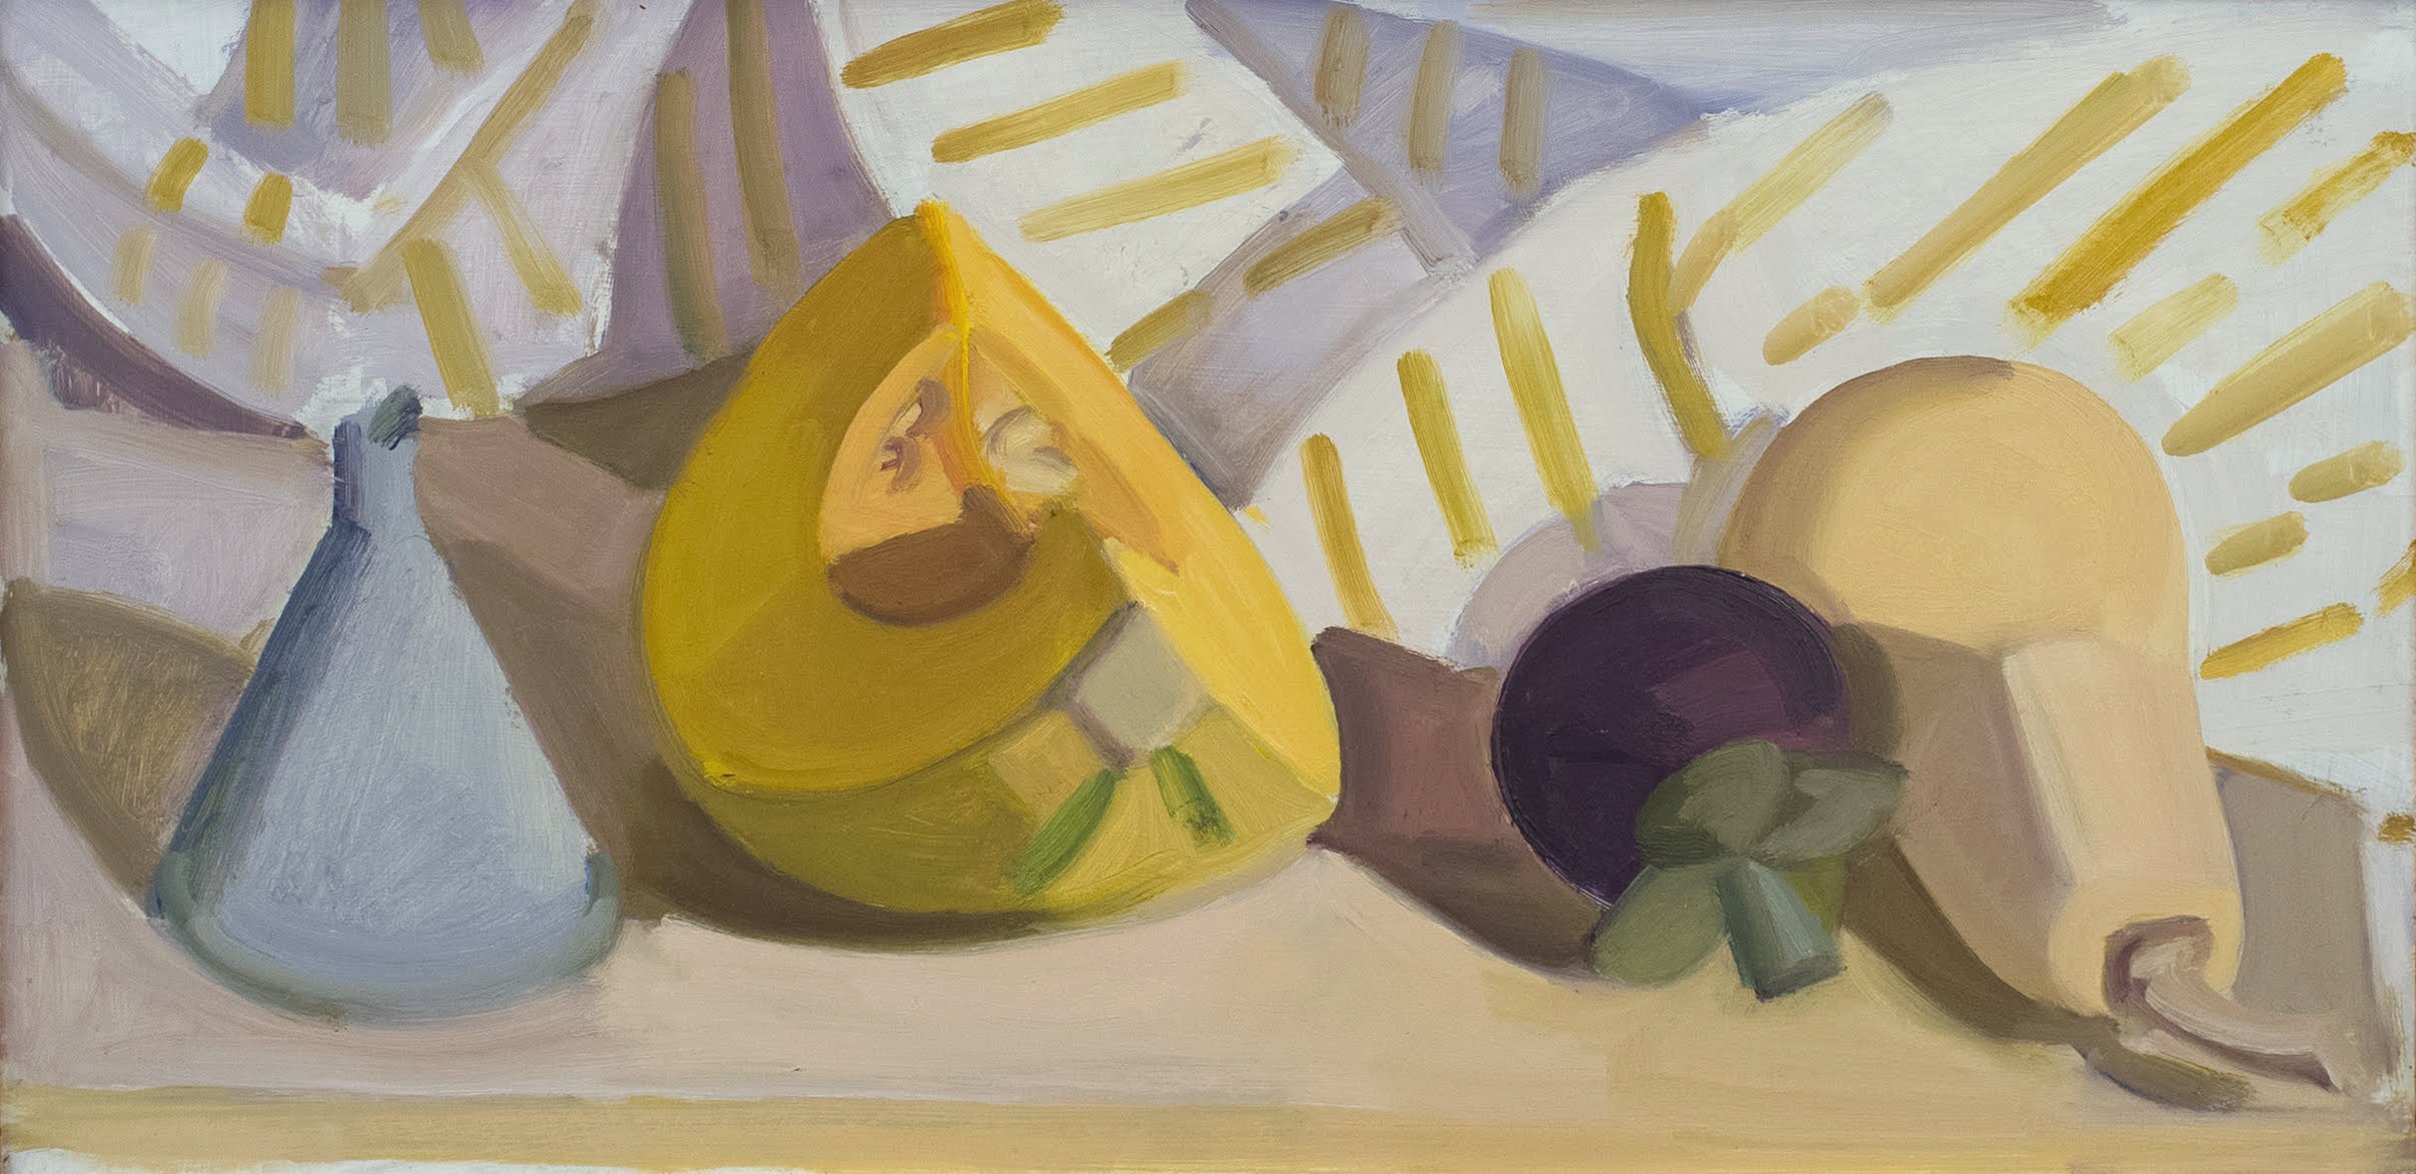   Butternut and Calabaza with Mangosteen and Funnel , c. 2005, oil/panel, 9 x 18 in. (Private collection) 